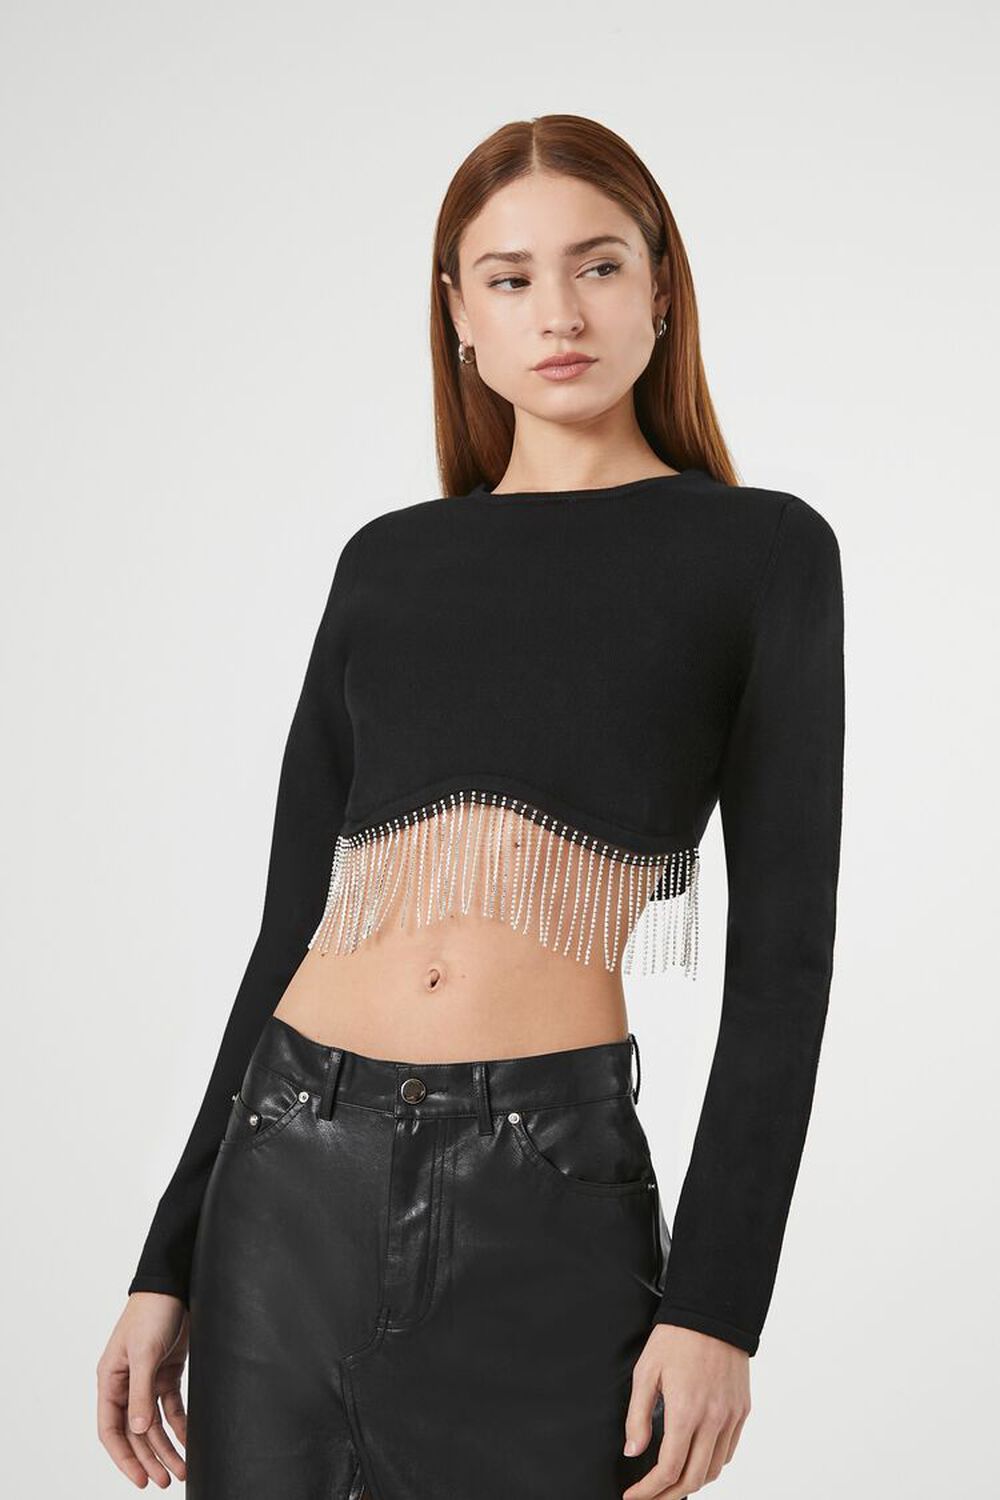 Forever 21 Women's Rhinestone-Fringe Crop Top in Black Medium | Date Night, Clubbing, Party Clothes | F21